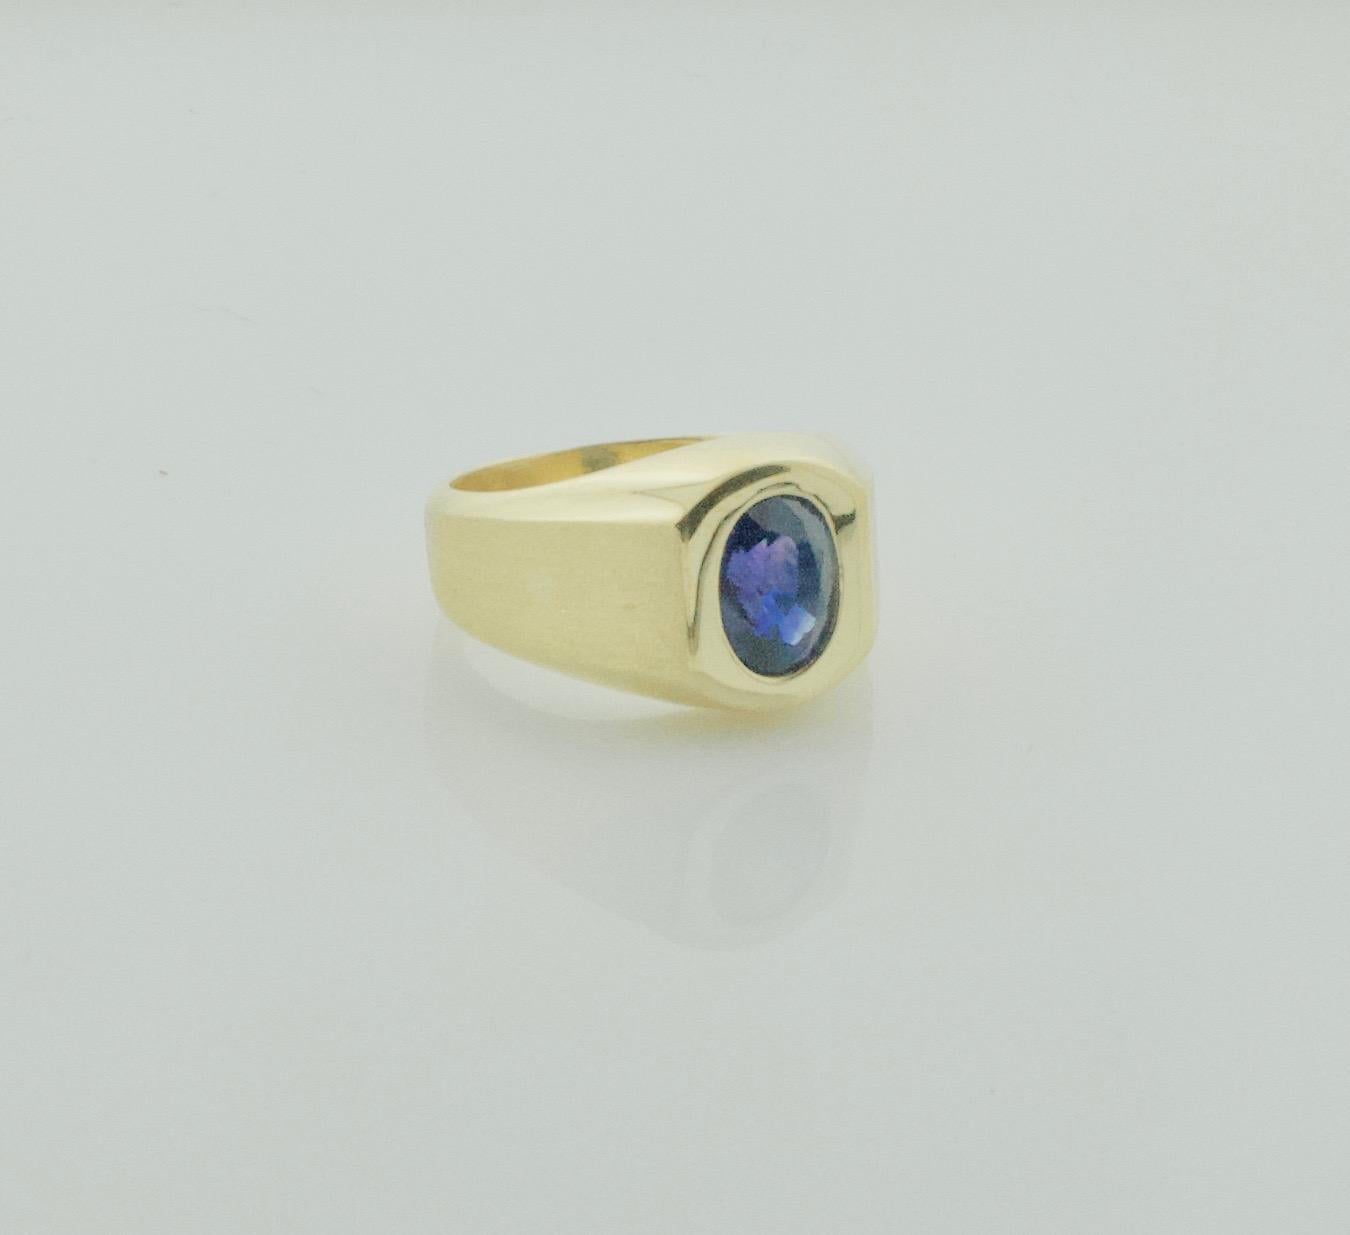 Classic Sapphire Pinky Ring,  2.75 Carats in 18k Yellow Gold
A classic ring inspired by The Ratpack in Oceans 11. The ring measures 13 mm in width, has a nice weight, and feels great on the hand.
